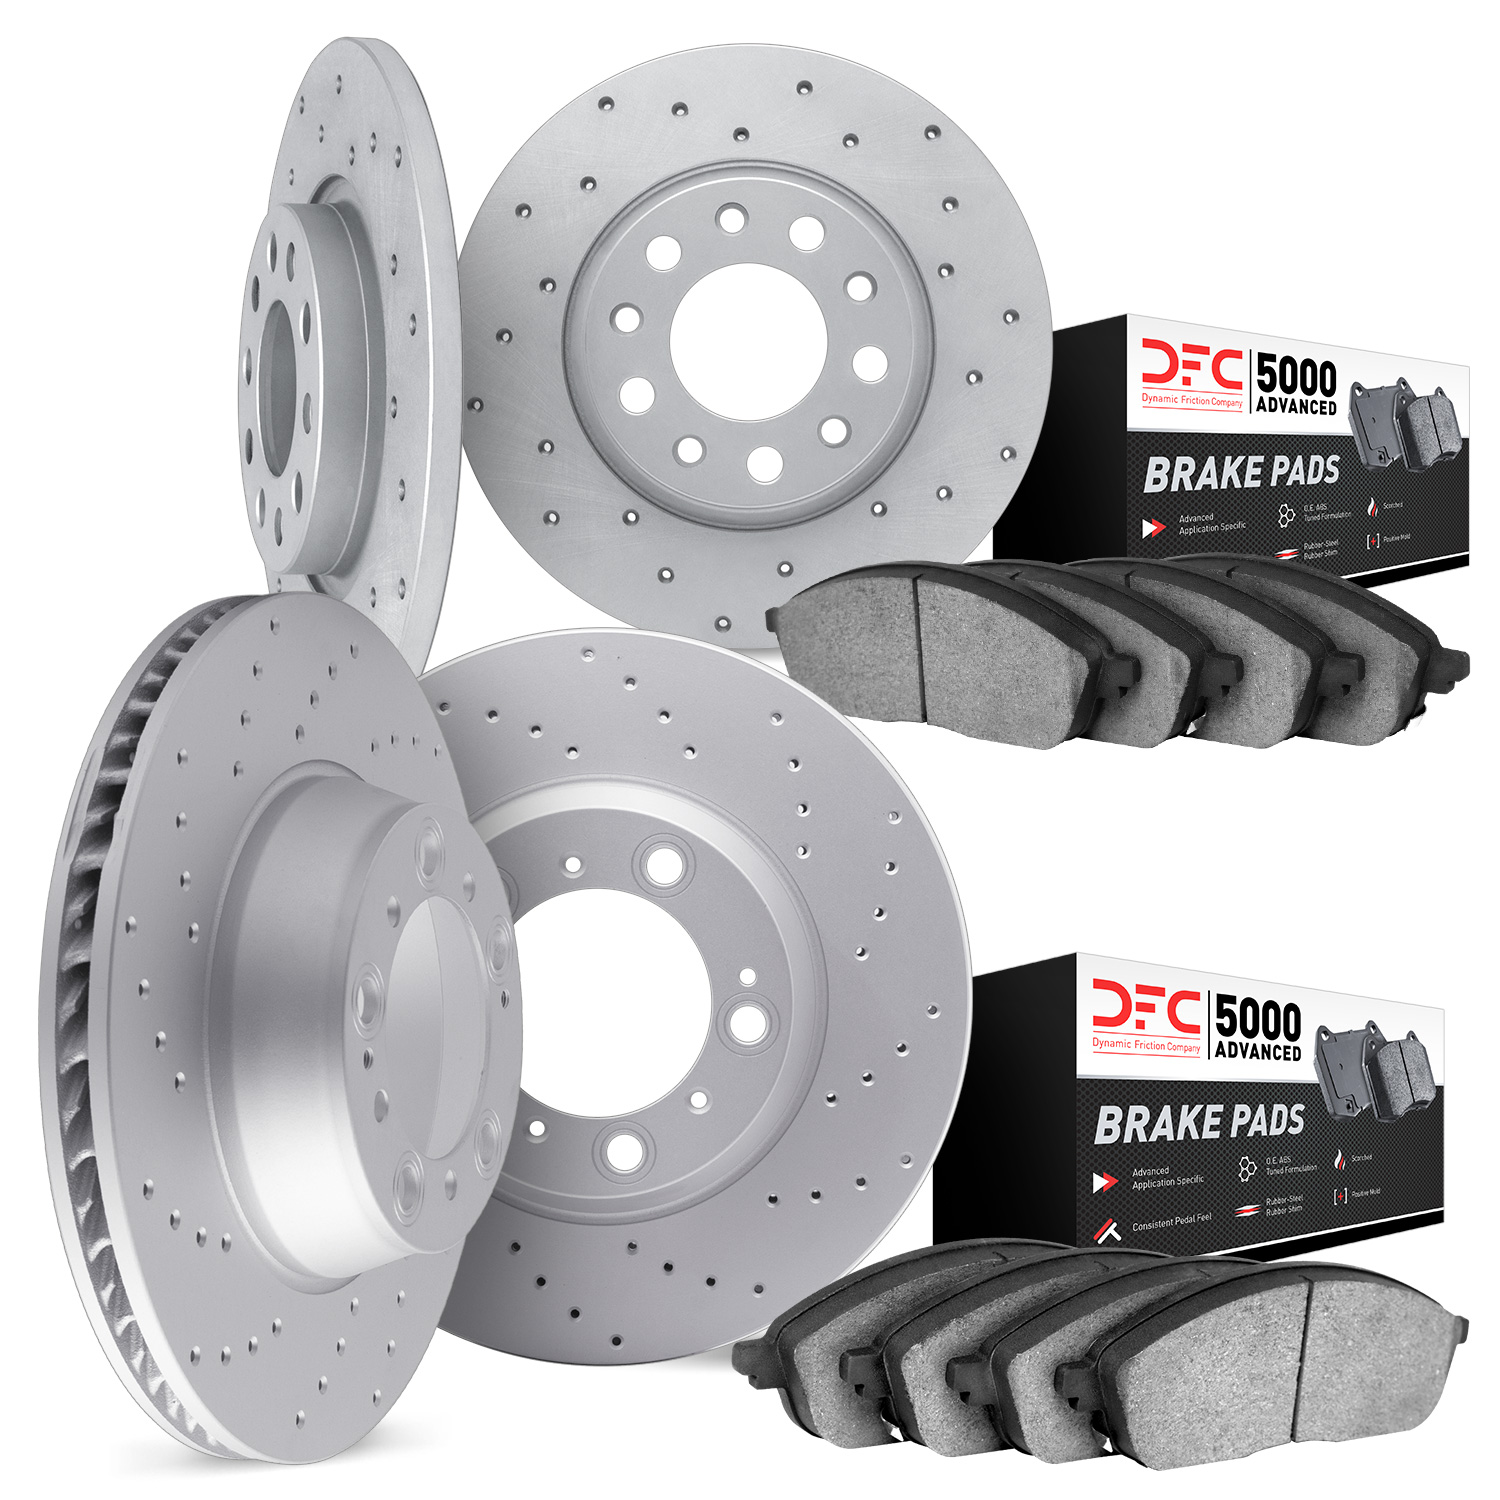 2704-59065 Geoperformance Drilled Brake Rotors with Active Performance Pads Kit, 2008-2014 Acura/Honda, Position: Front and Rear